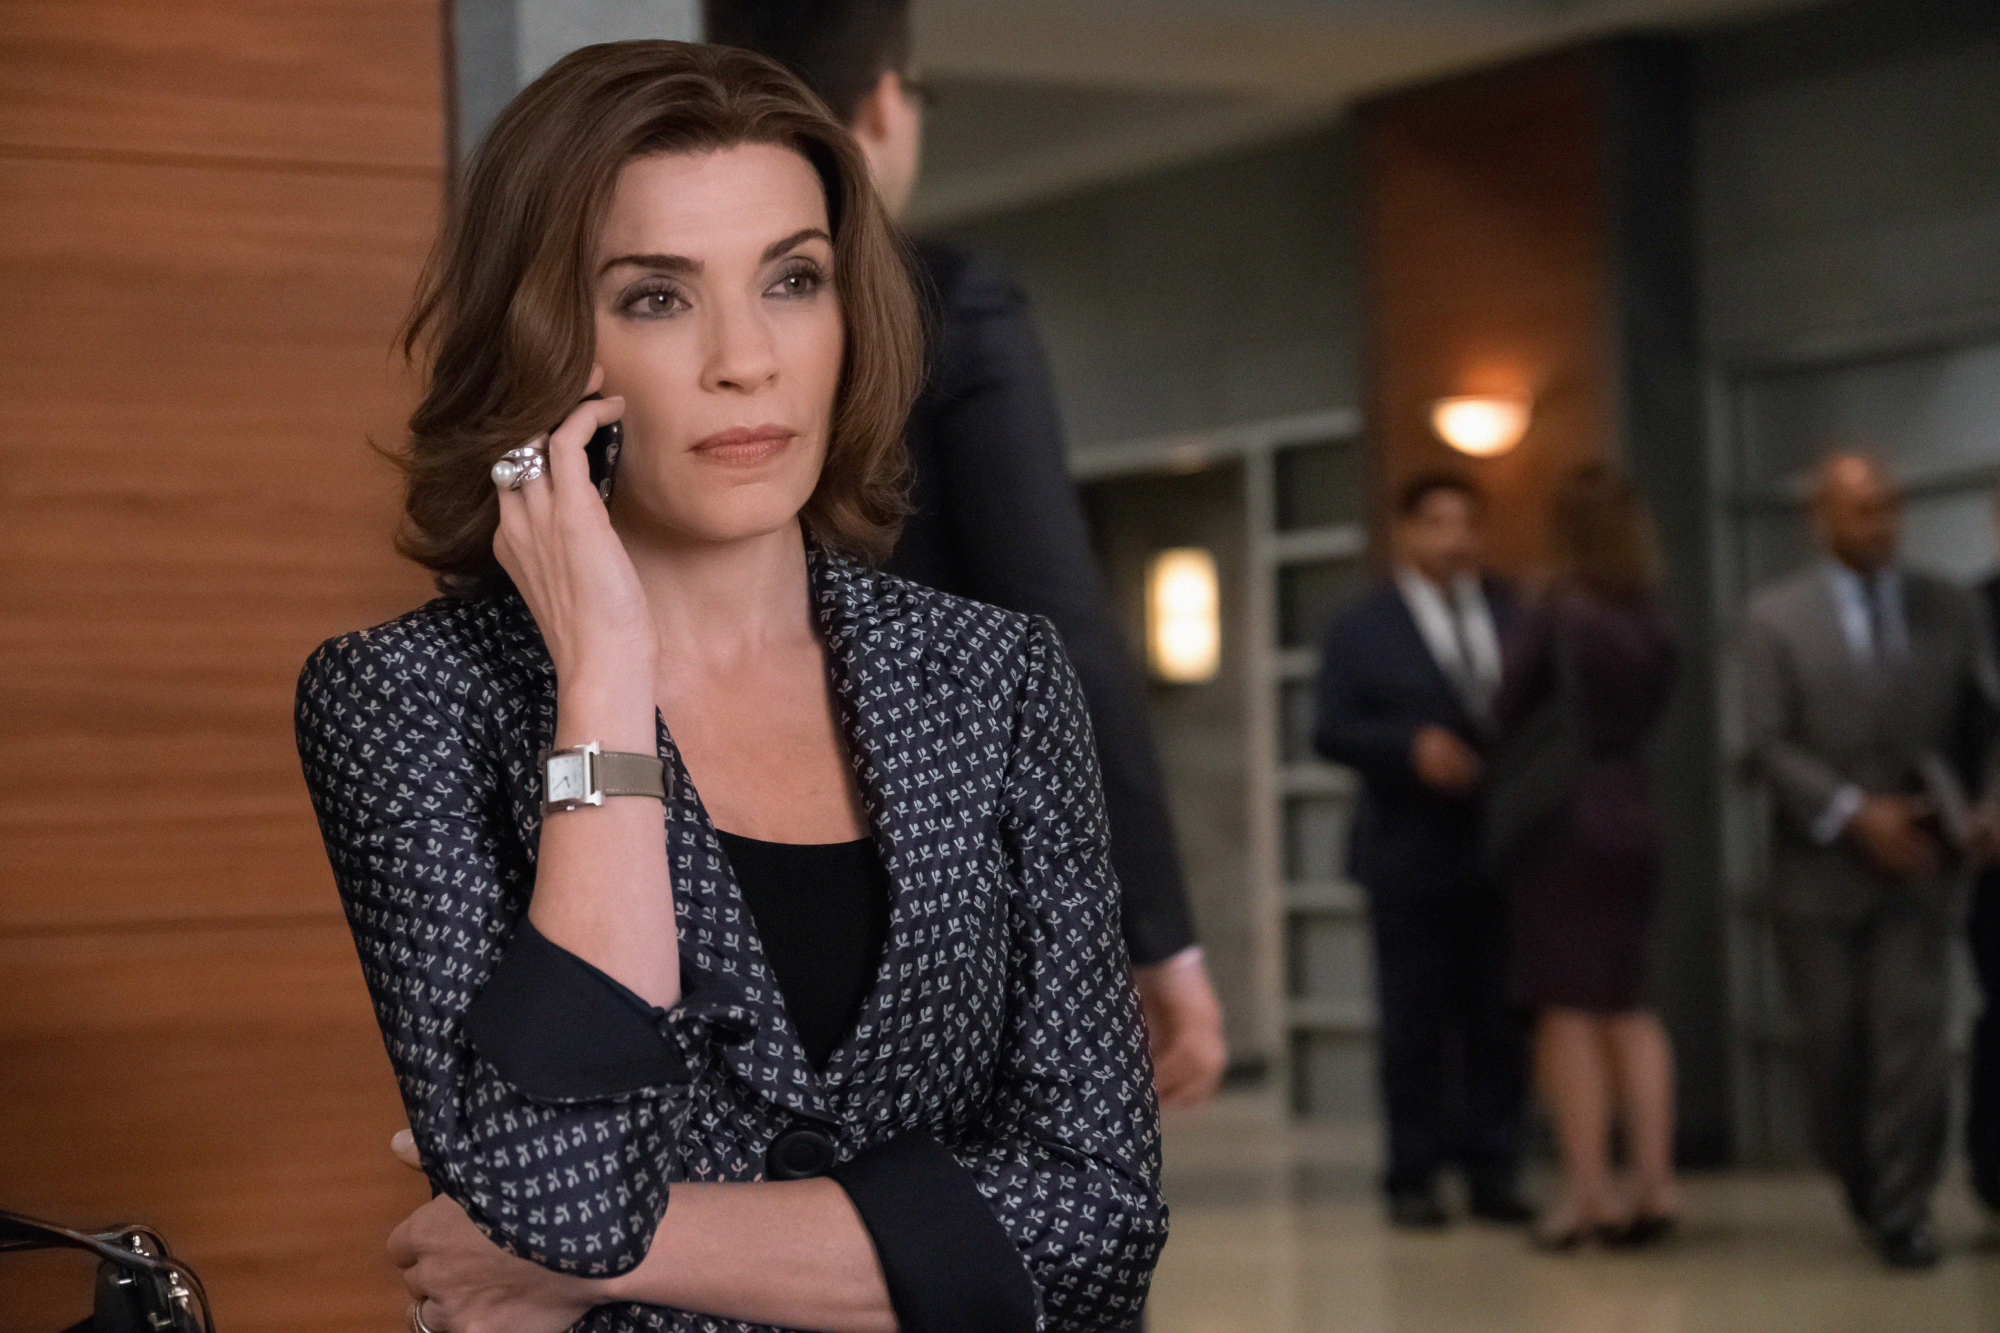 The Good WIfe, Julianna Marguilies